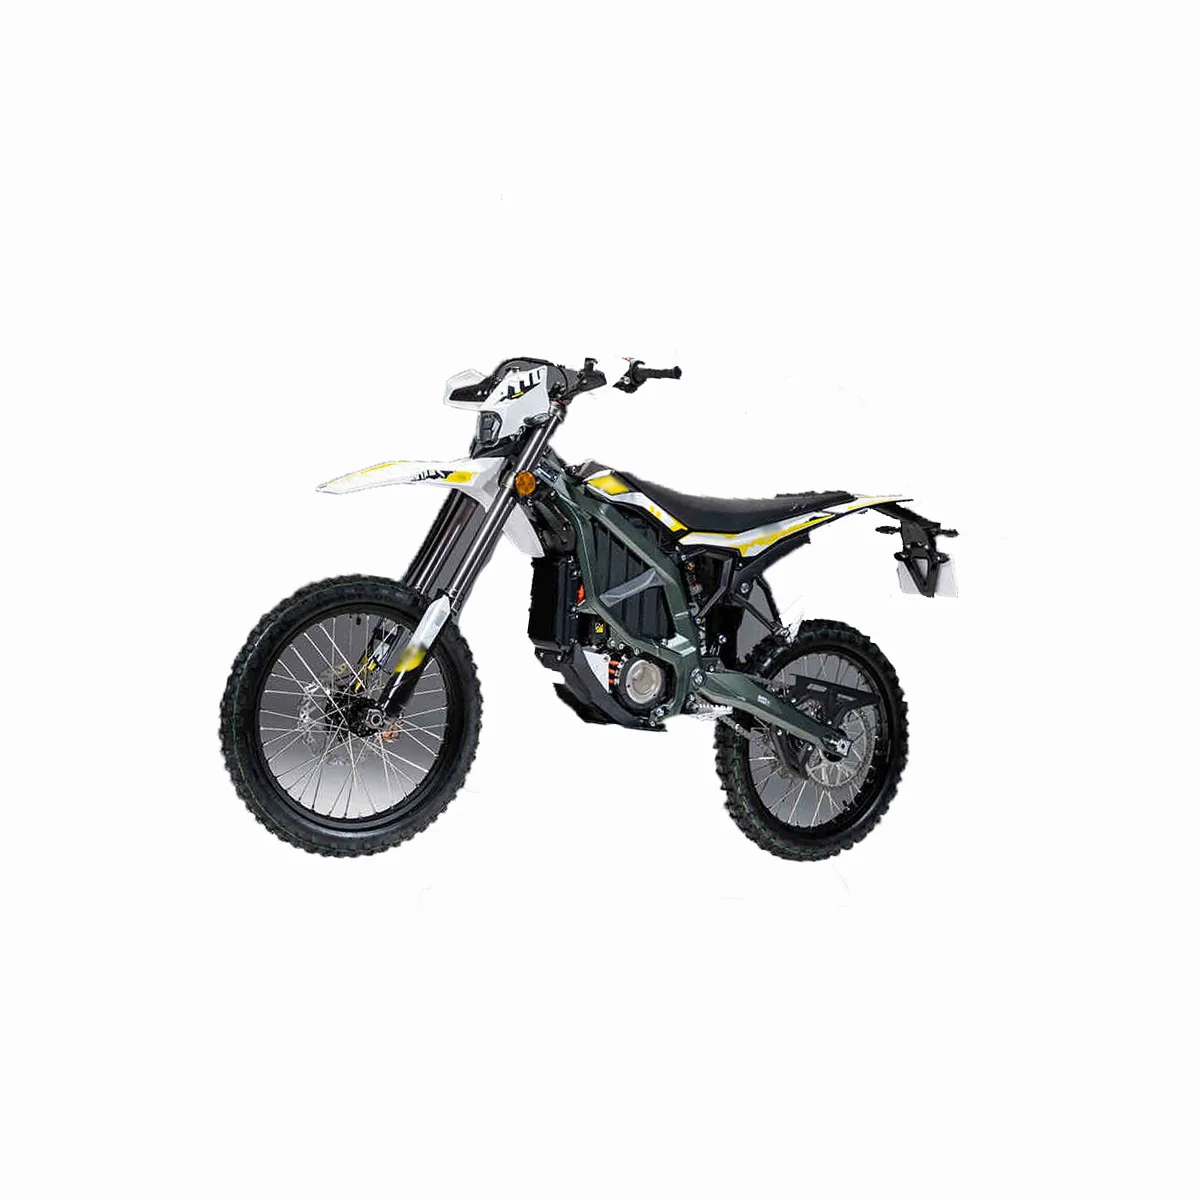 2023 New Release 74V 55Ah suron electric bike 12500W sutton ebike 72v sur ron road legal electric dirt bike ultra b for adults